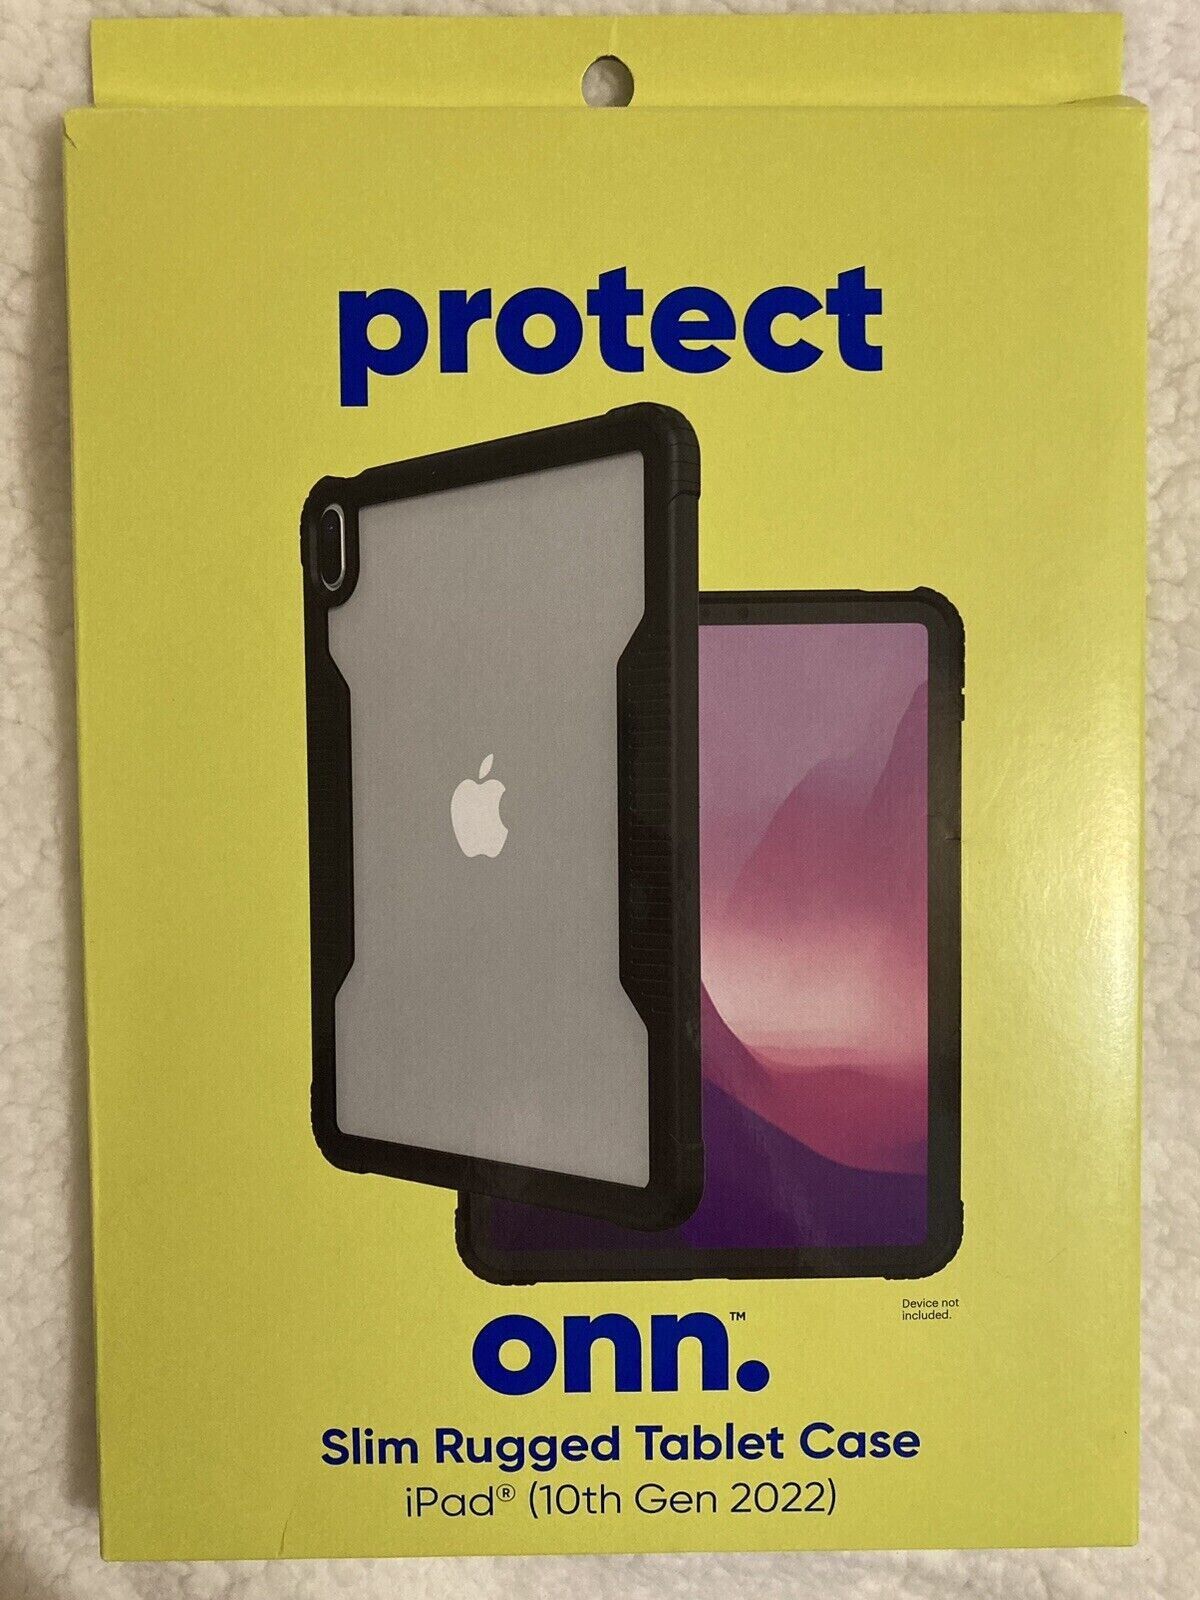 New in Box Protect ONN Slim Rugged Tablet Case iPad 10th Gen 2022 Drop Tested